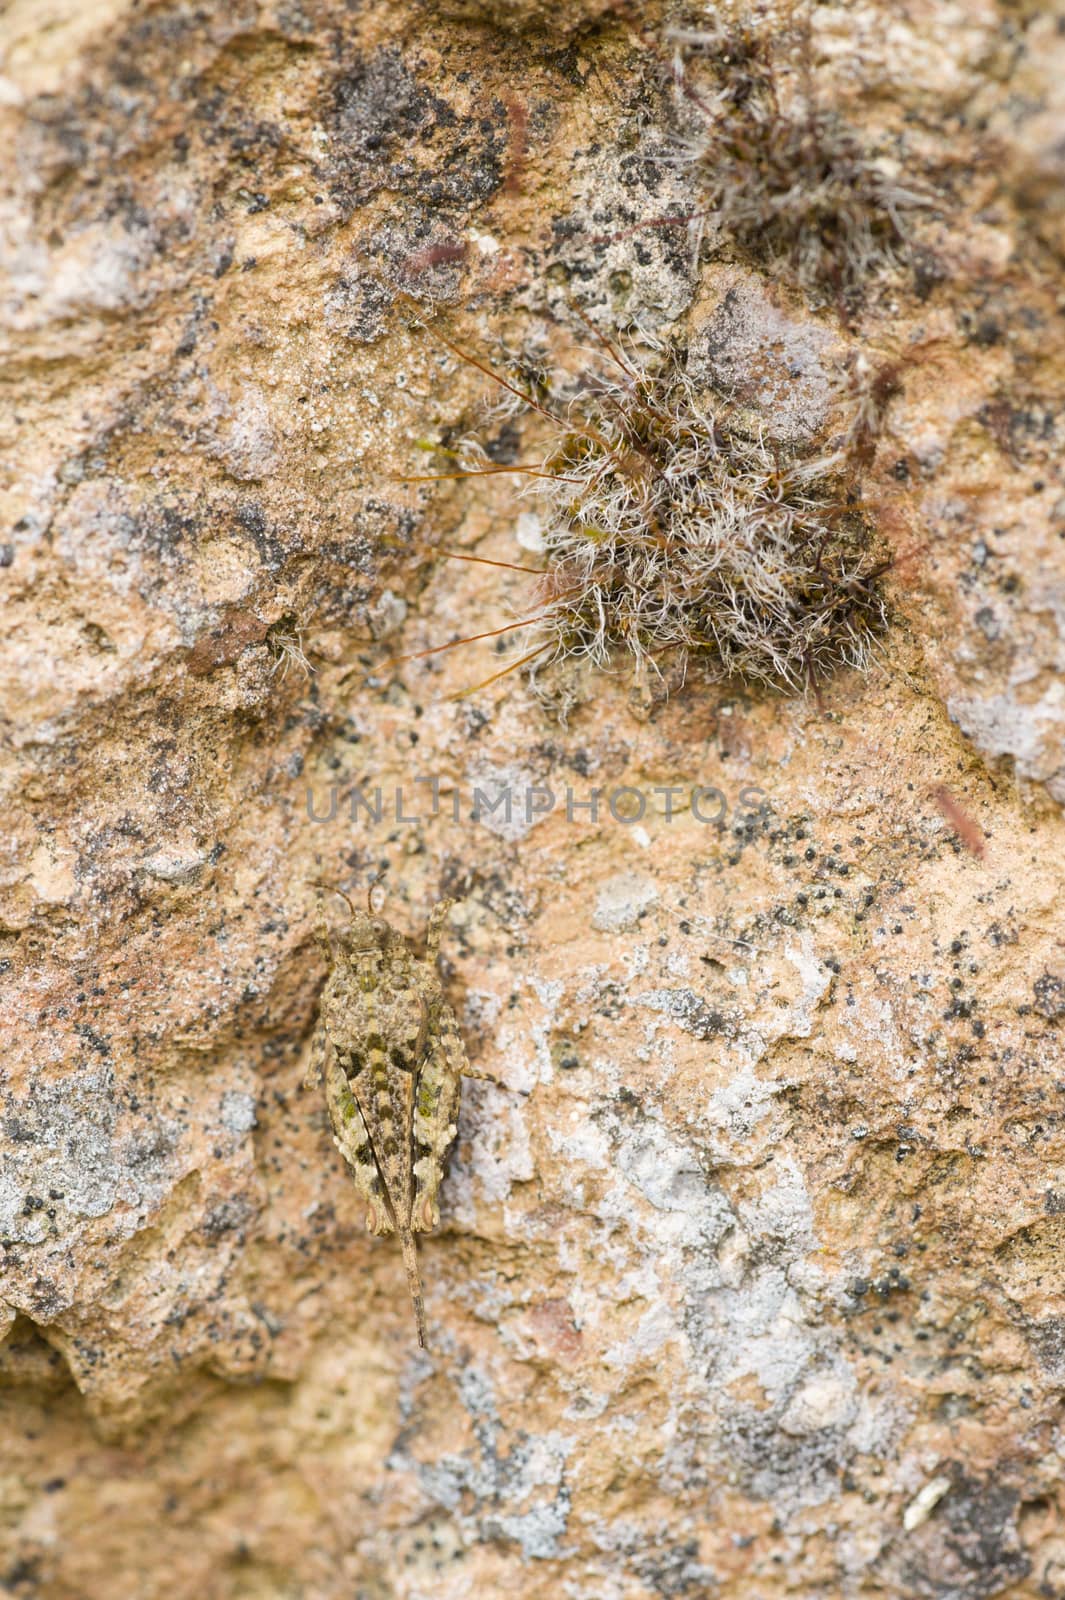 Small grasshopper in camouflage with a rock texture